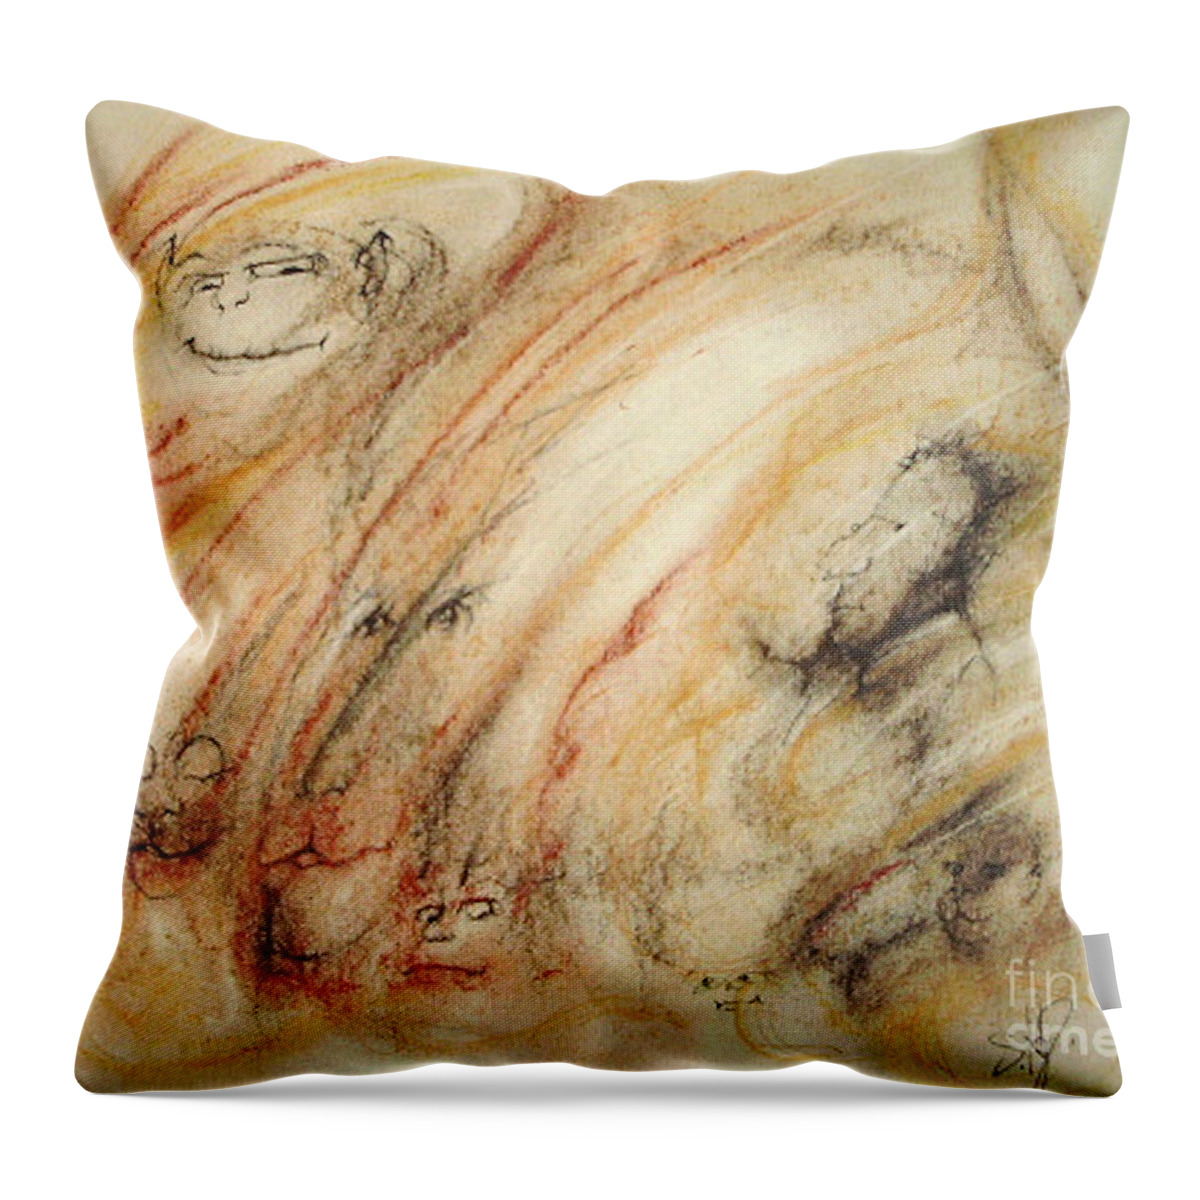 Surreal Throw Pillow featuring the drawing Gollum is Watching by Stephanie H Johnson